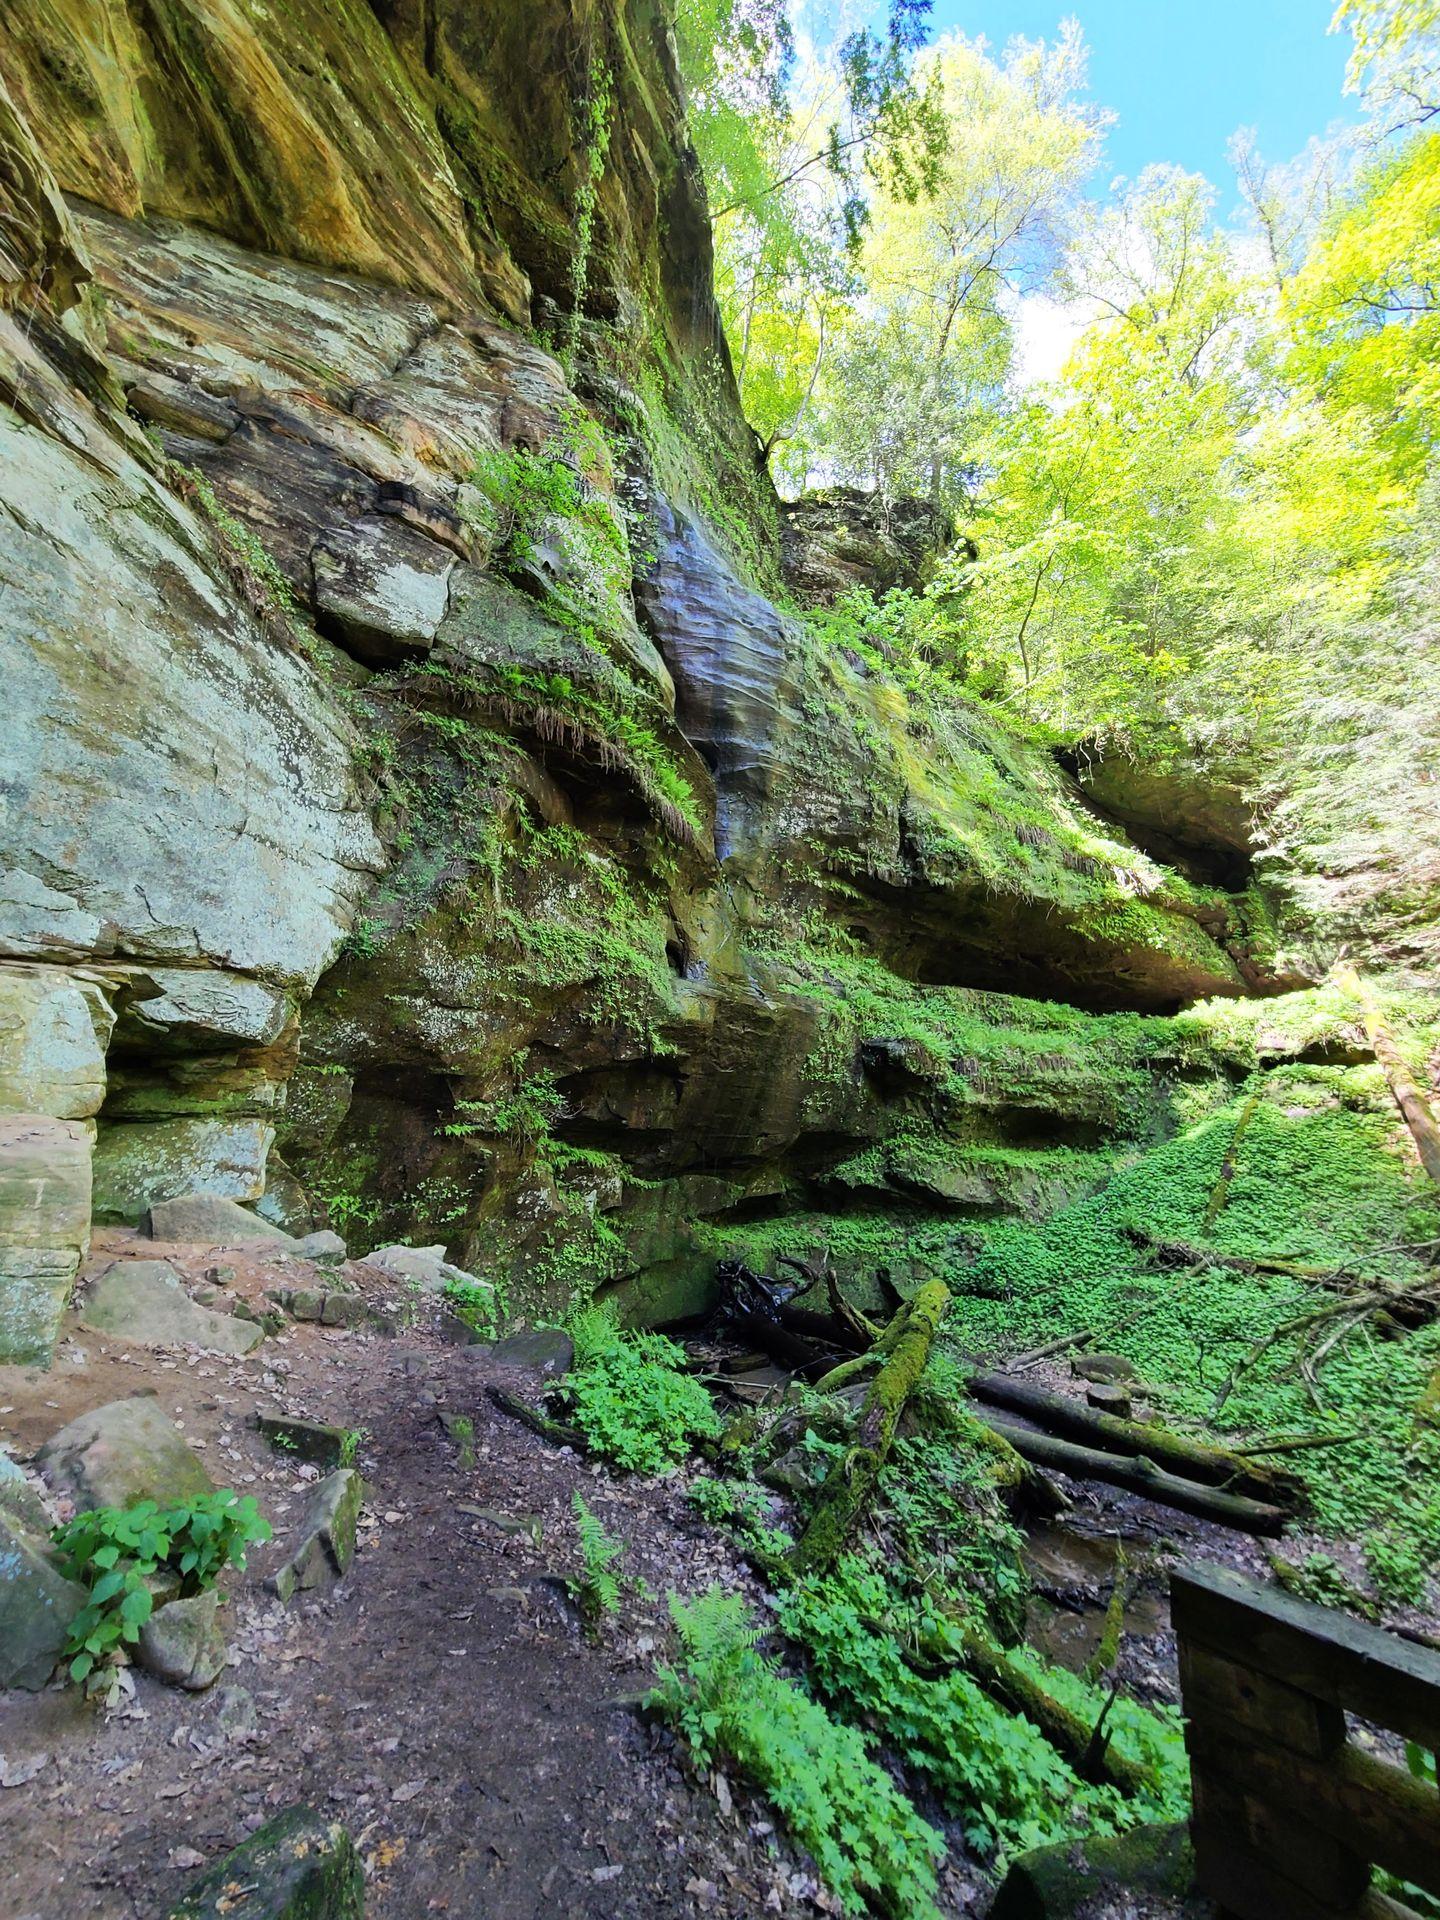 A wall of rocks covered in green moss in Hocking Hills.